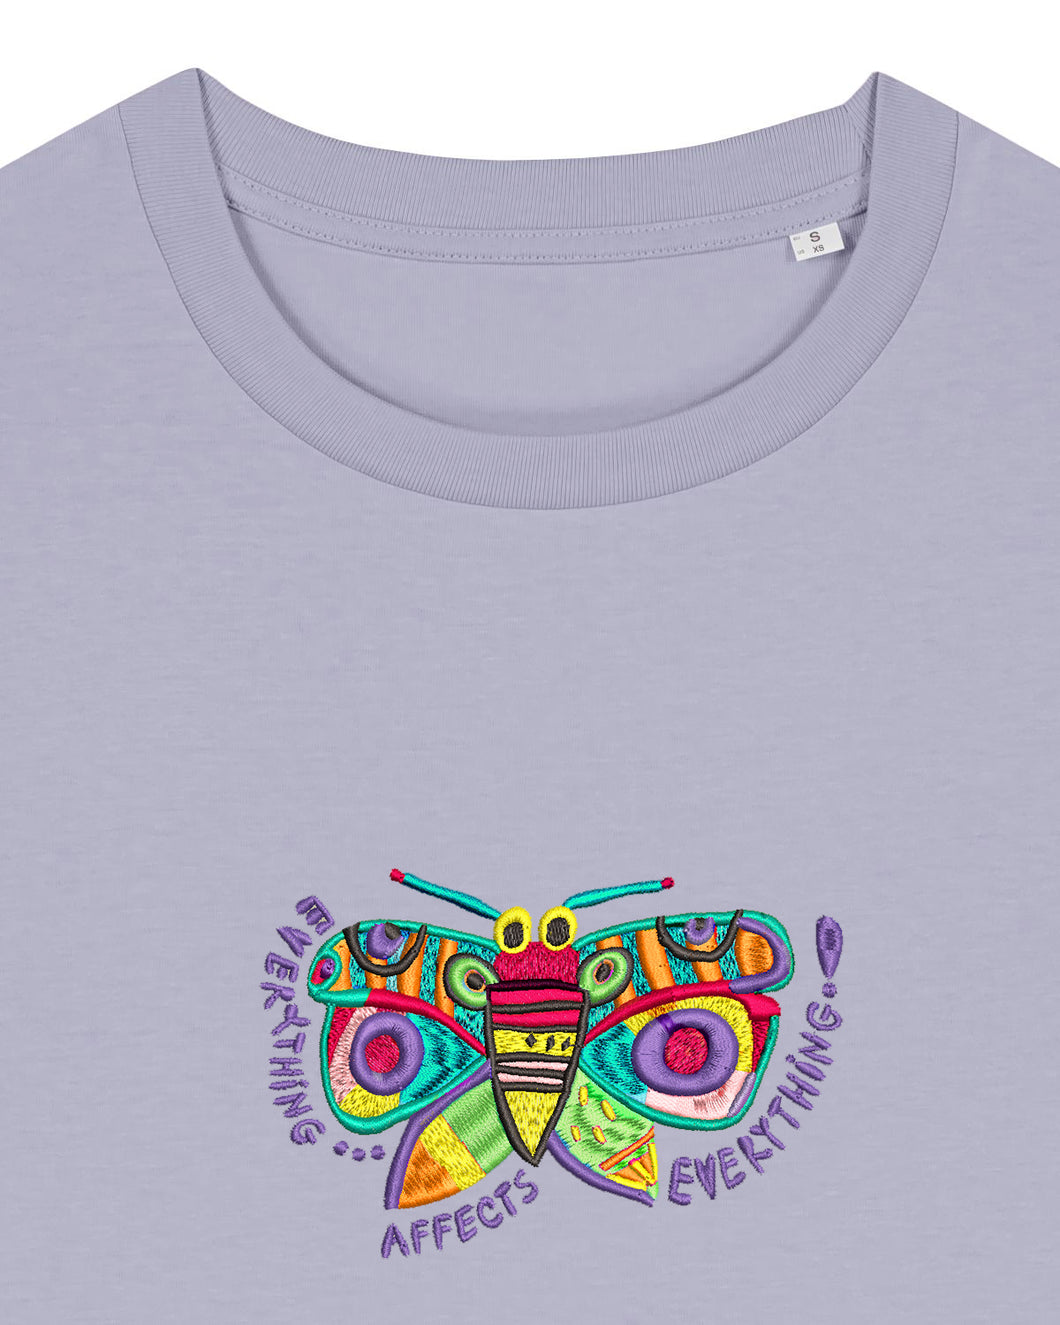 BUTTERFLY 🦋 - Embroidered WOMEN'S T-SHIRT